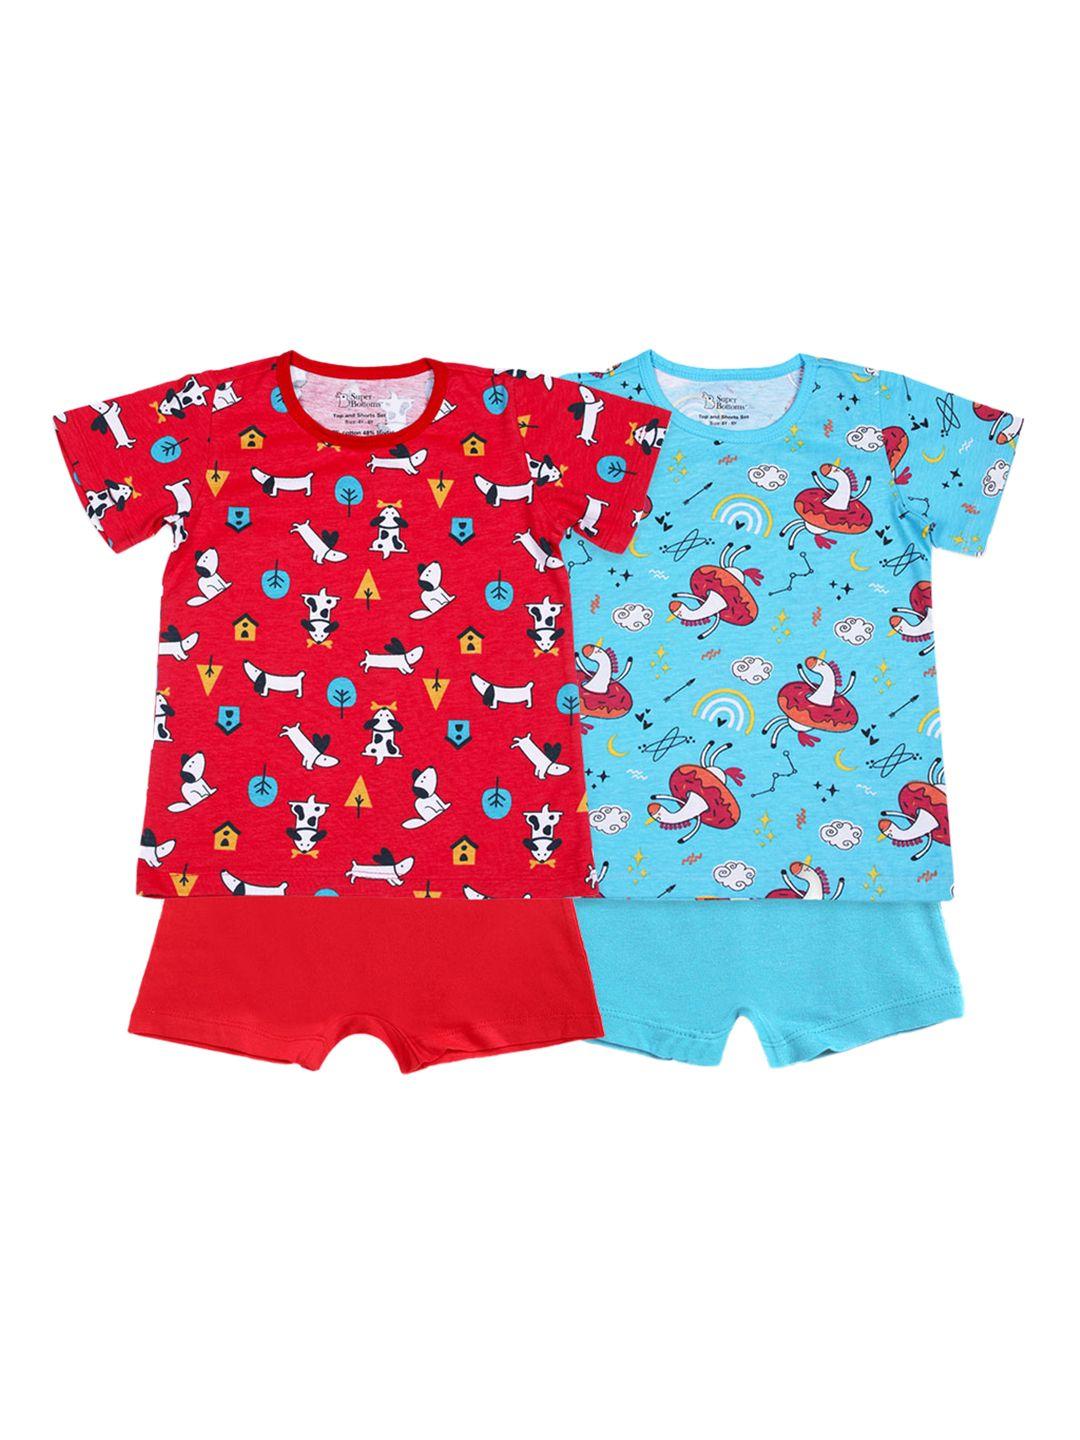 superbottoms kids red & turquoise blue set of 2 printed cotton sustainable clothing set